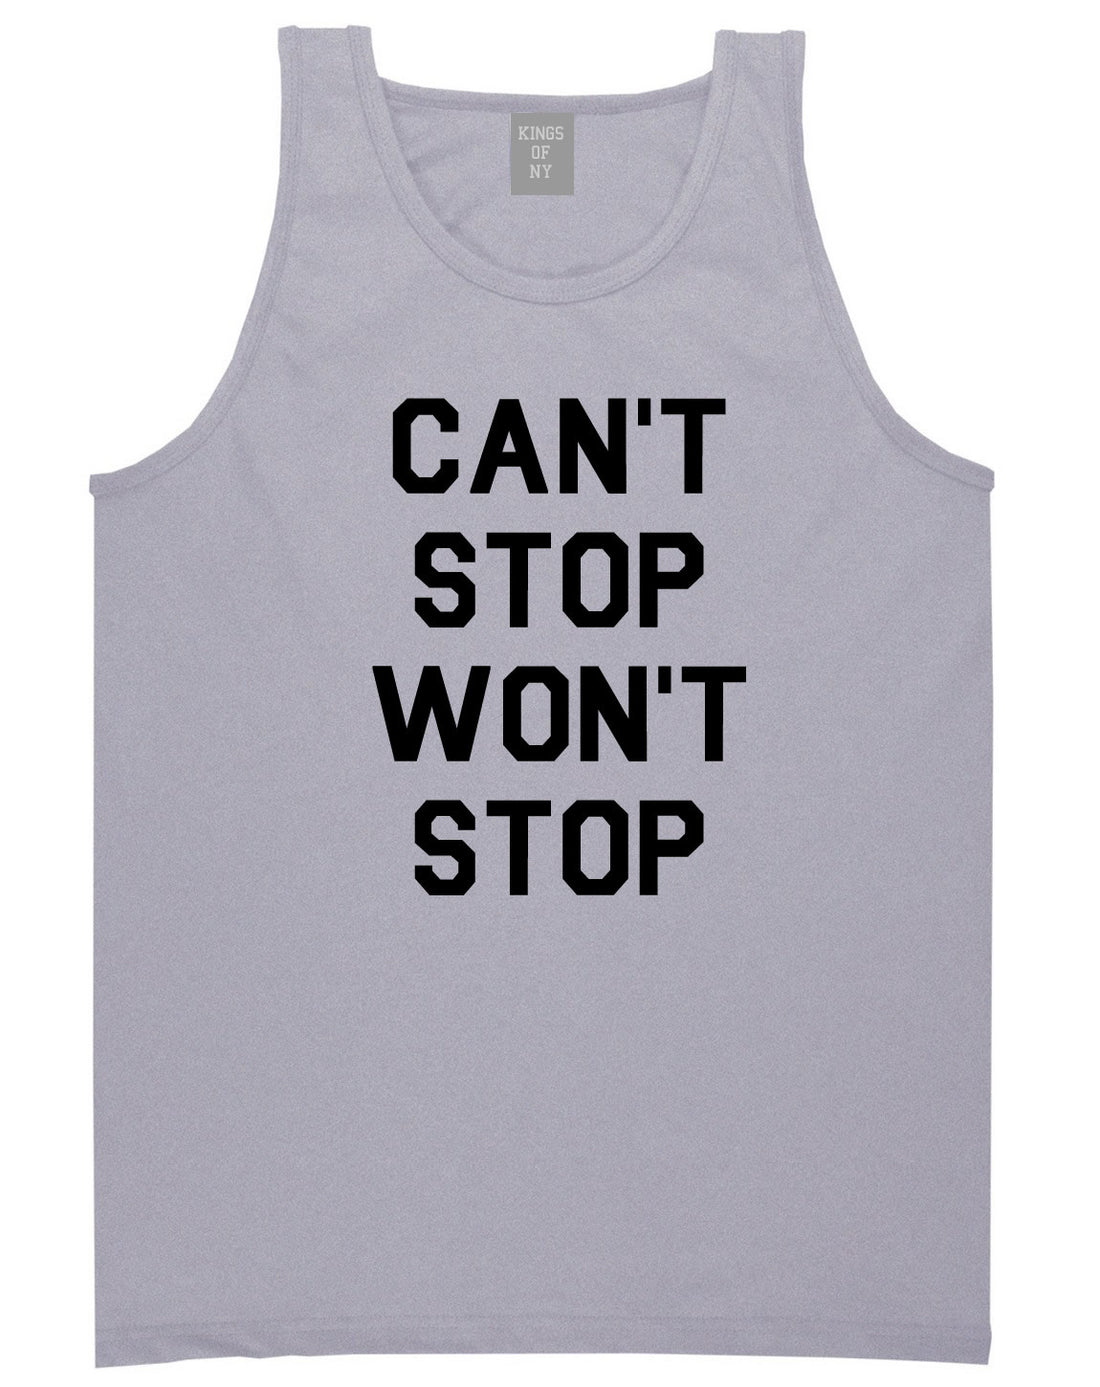  Kings Of NY Cant Stop Wont Stop Tank Top in Grey